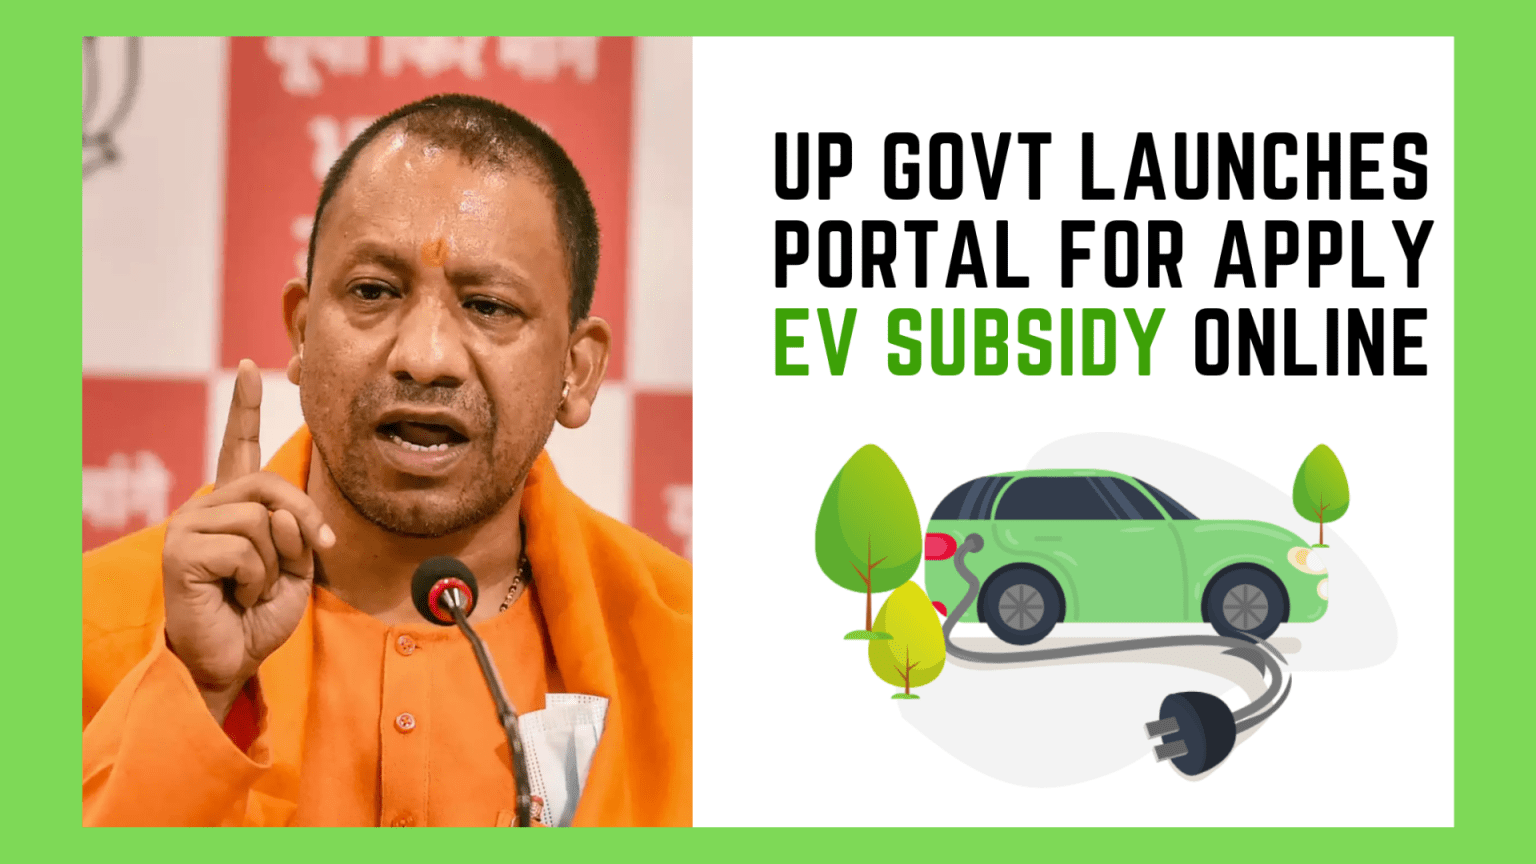 UP govt launches portal for apply EV subsidy online EVehicleinfo